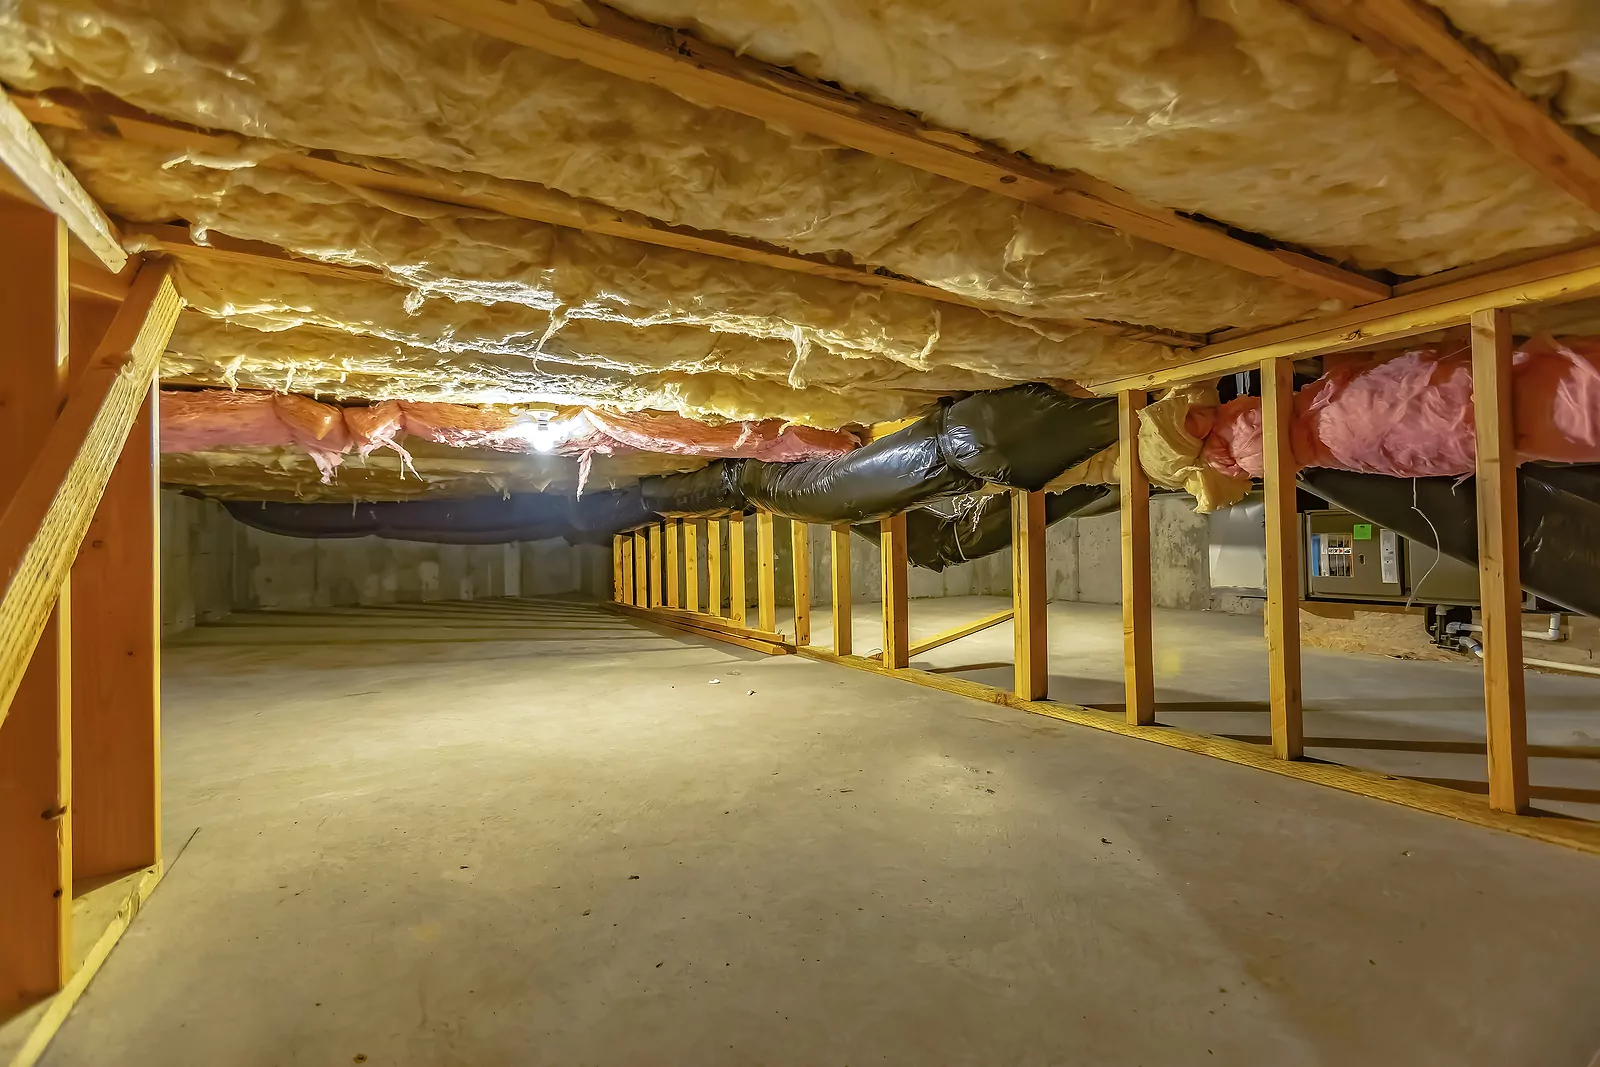 Basement or crawl space with upper floor insulation and wooden support beams.